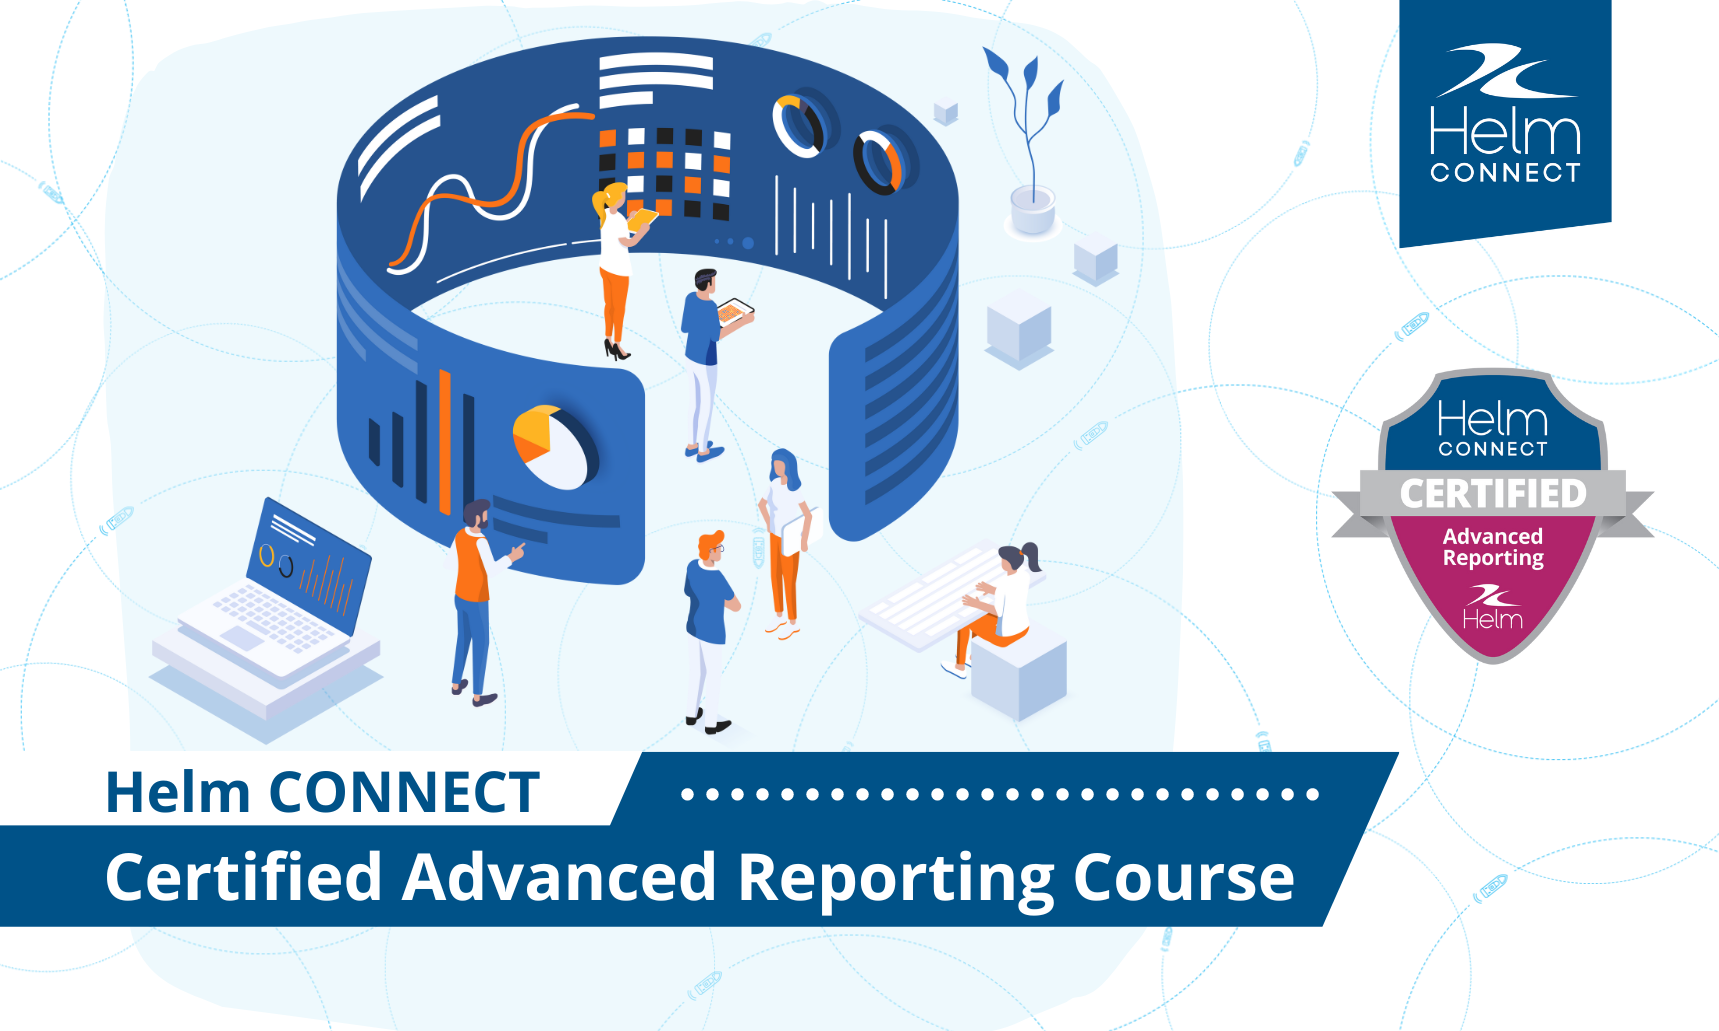 Helm CONNECT Certified Advanced Reporting Course